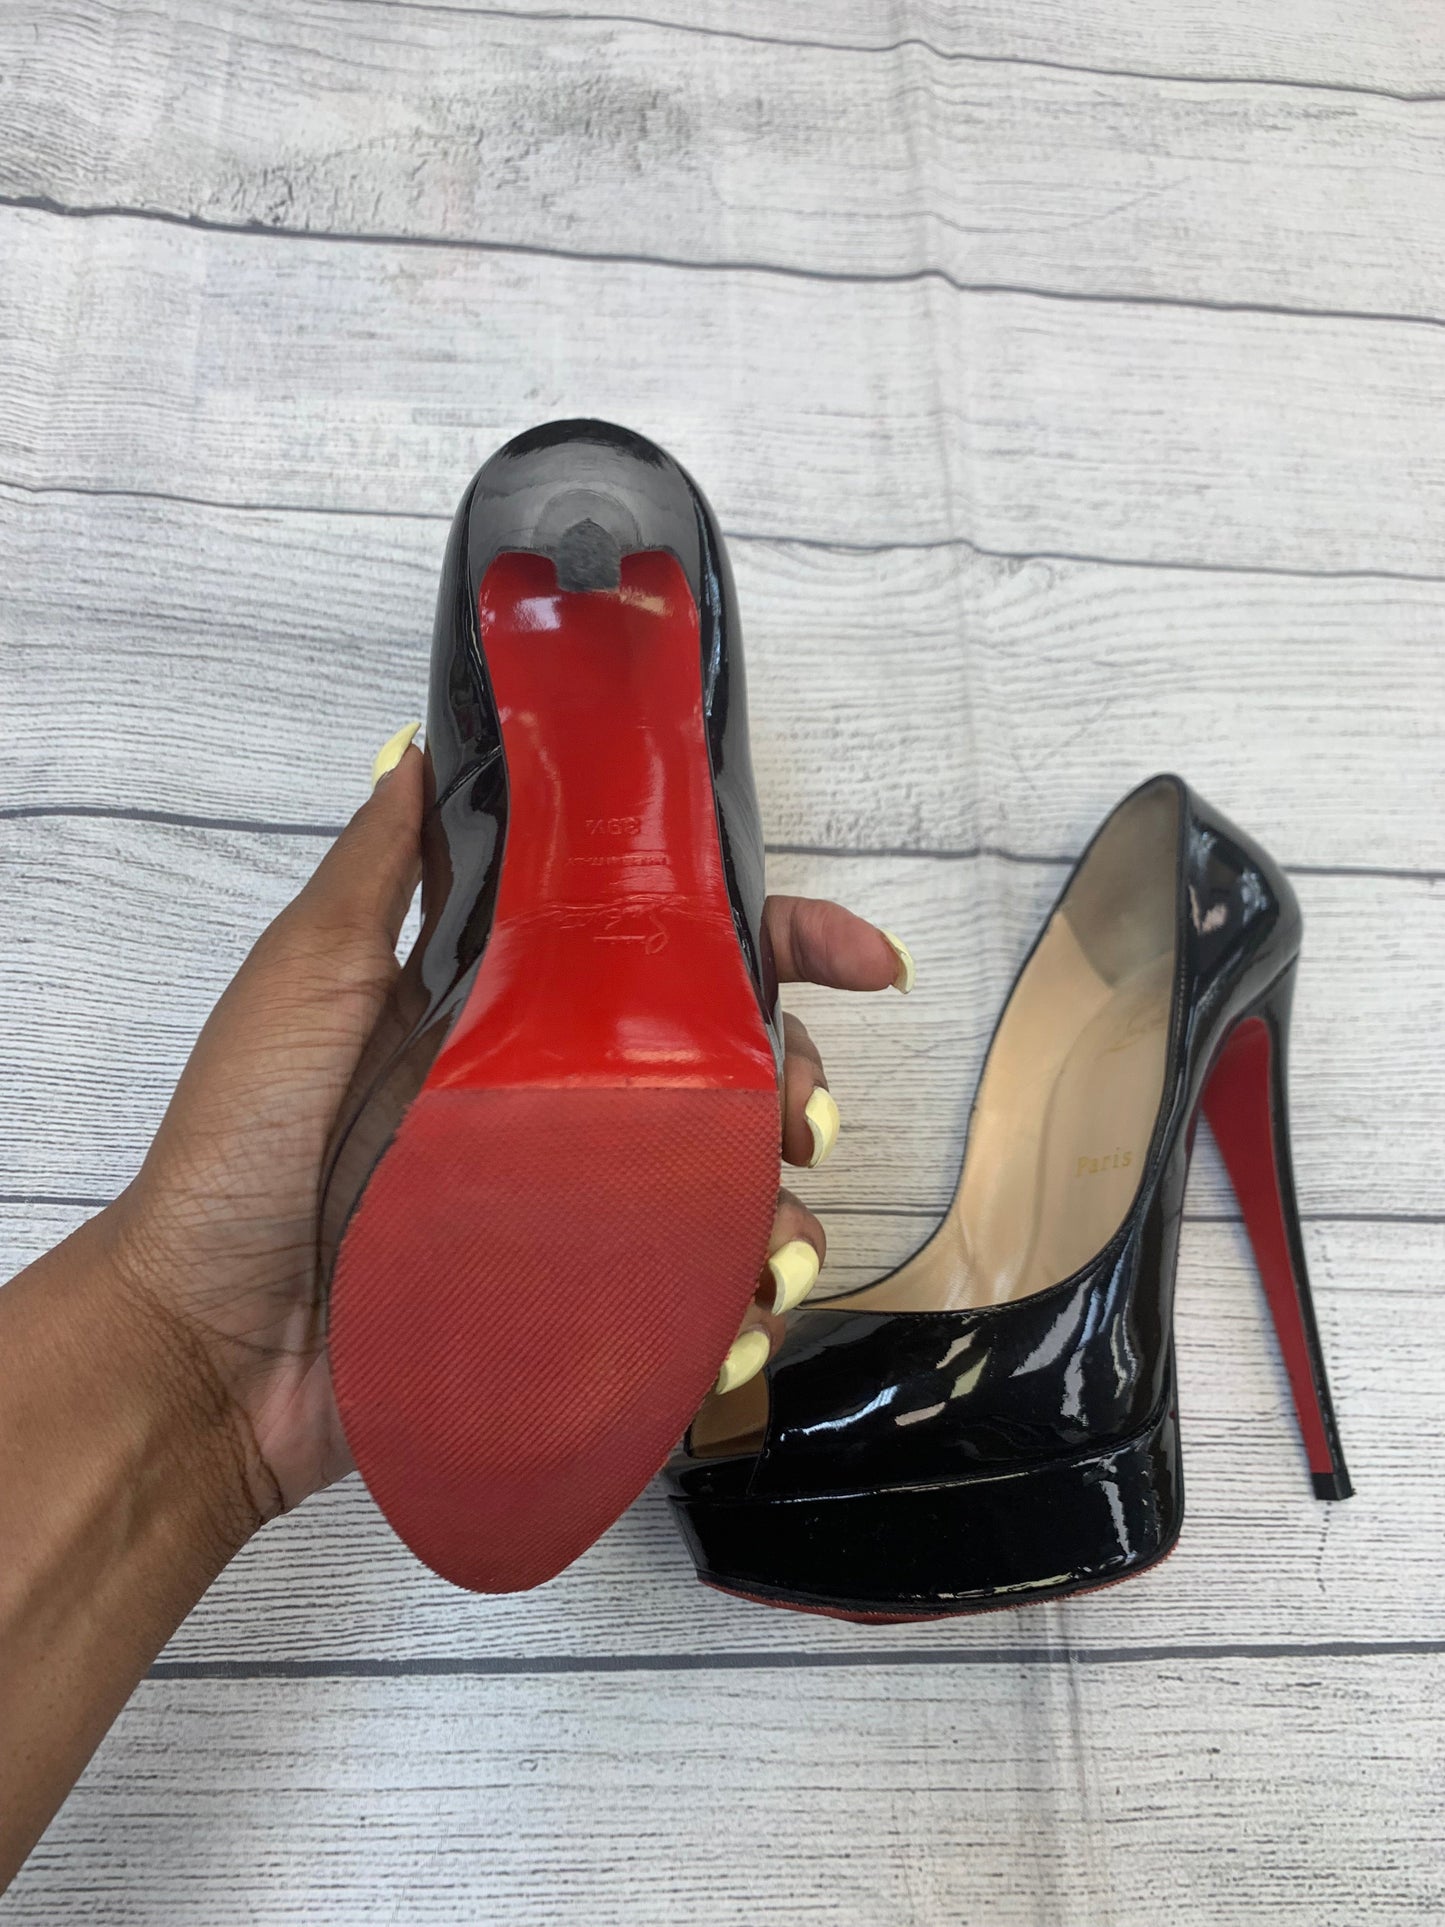 Shoes Designer By Christian Louboutin  Size: 8.5